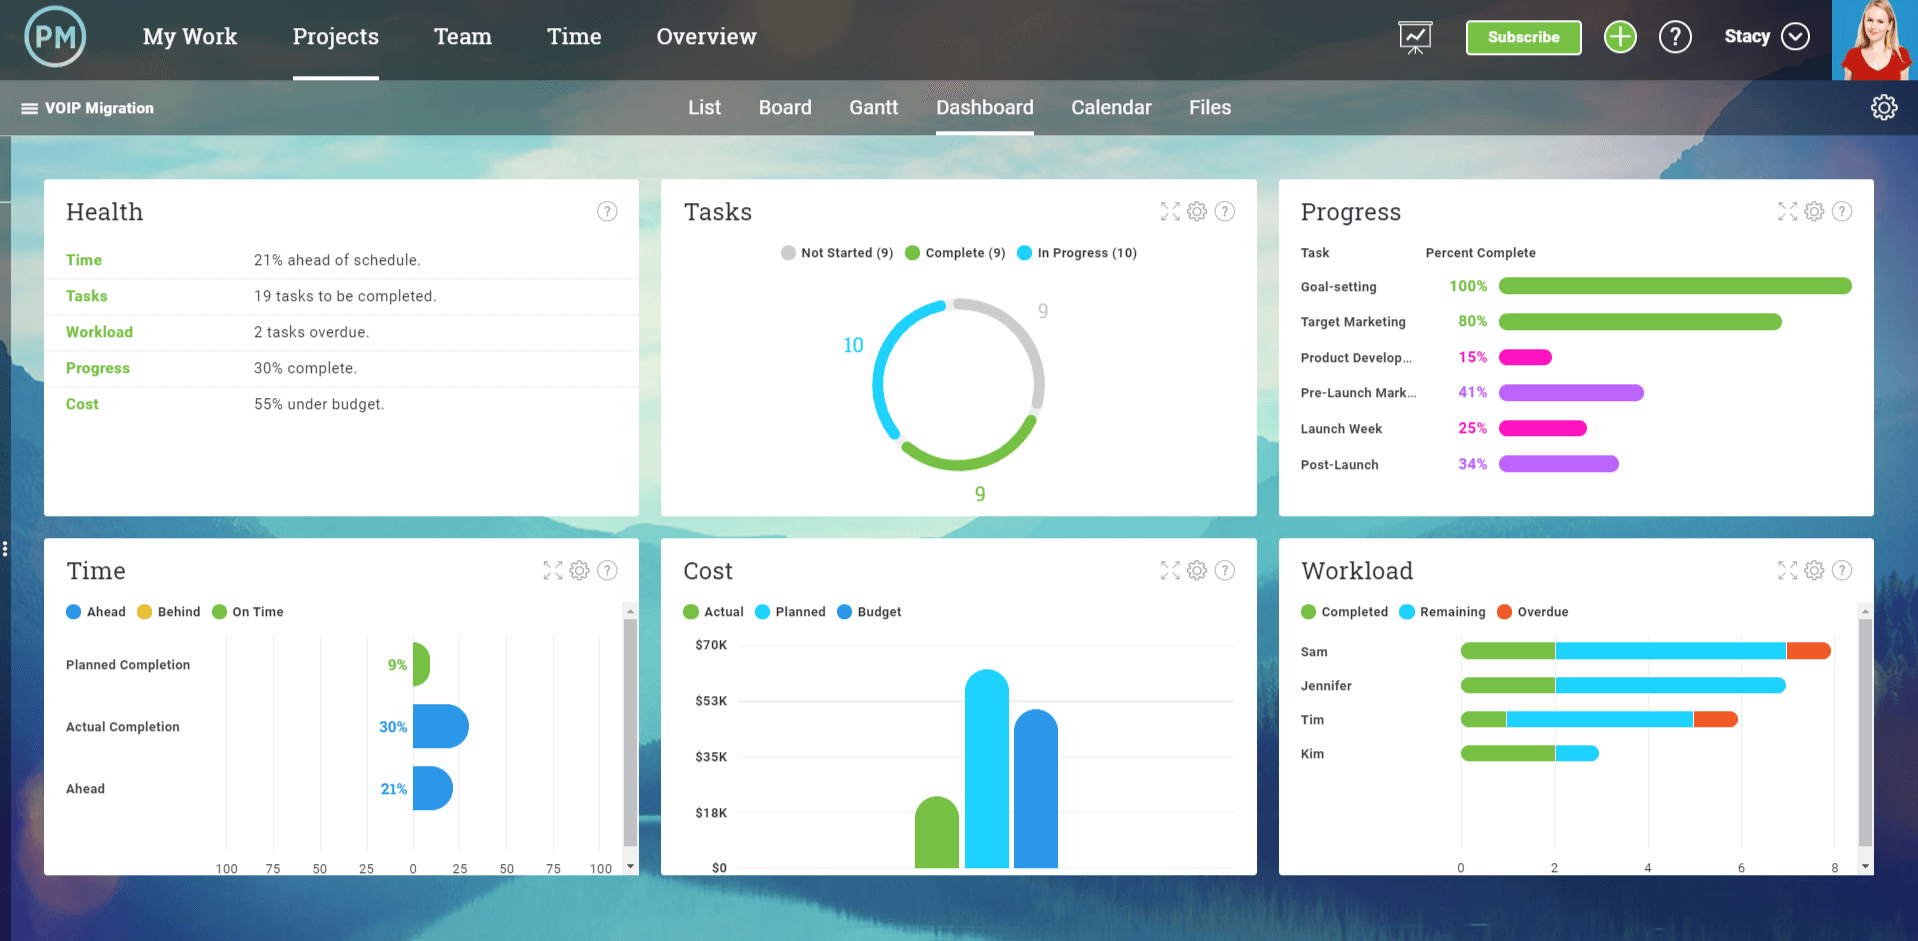 Track projects in real time with dashboards